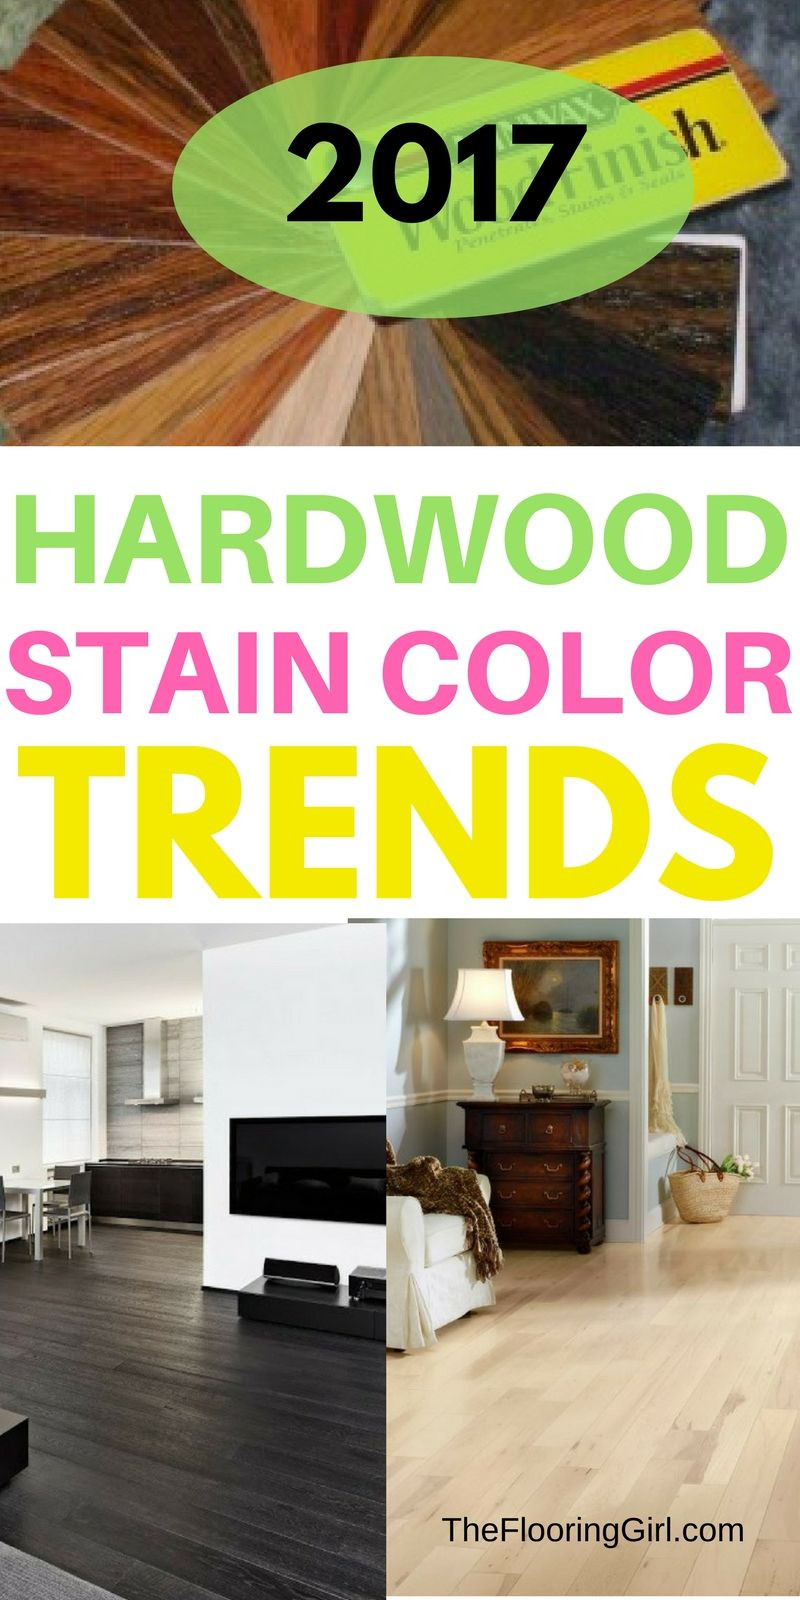 30 Amazing Best Vacuum for Pet Hair and Hardwood Floors 2017 2024 free download best vacuum for pet hair and hardwood floors 2017 of hardwood flooring stain color trends 2018 more from the flooring with hardwood flooring stain color trends for 2017 hardwood colors that 